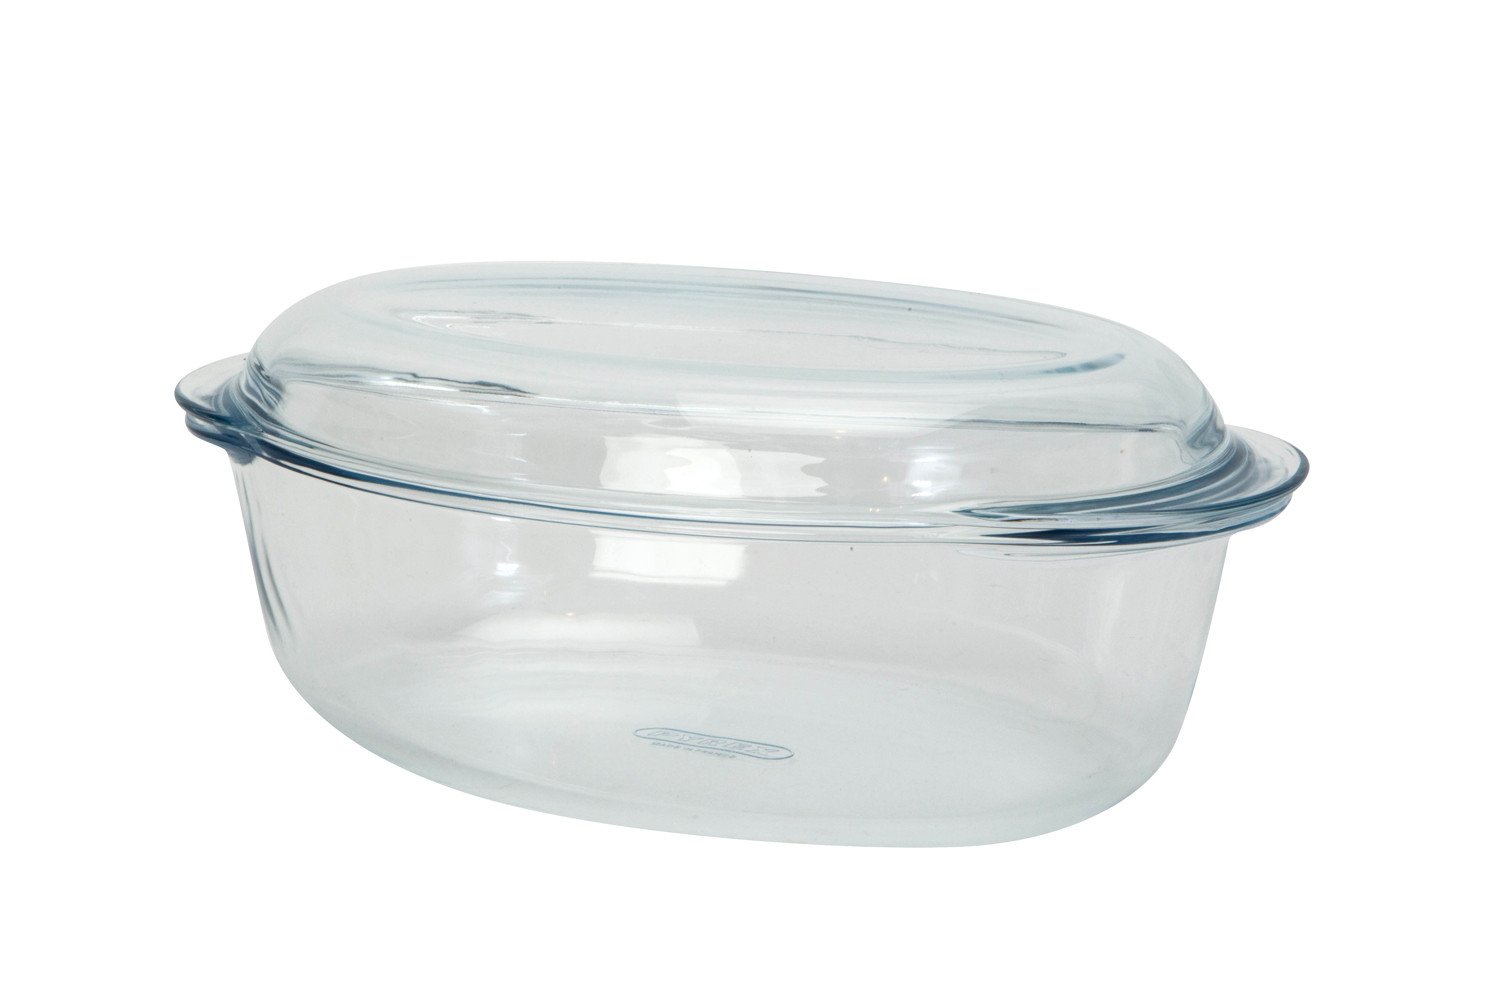 утятница pyrex o cuisine 4 5л Утятница Pyrex 4л, 459AA